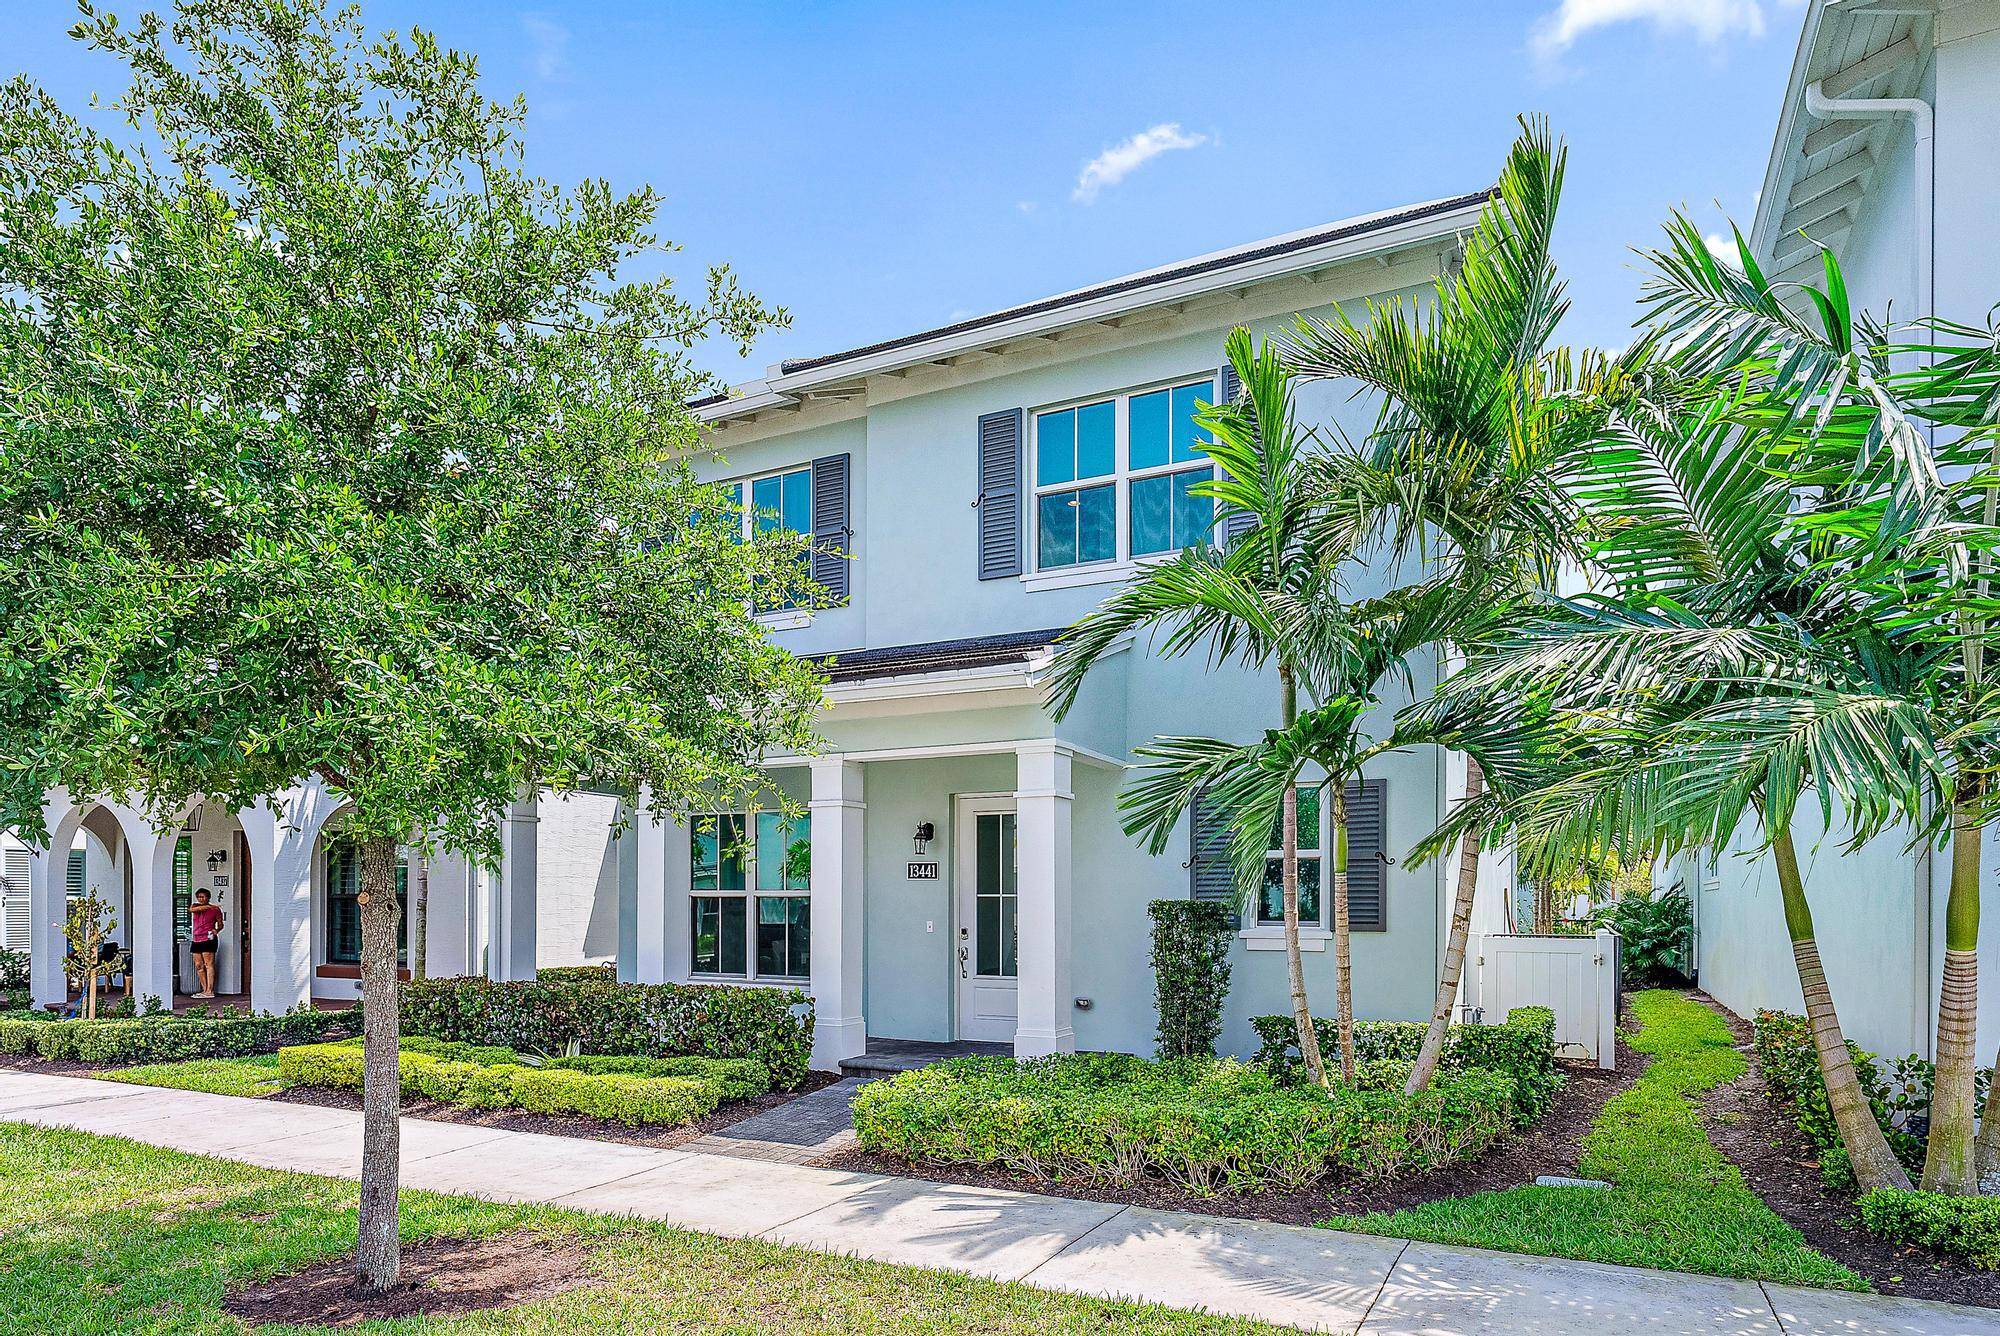 Are you searching for a newer two story luxury rental home in Palm Beach County with three bedrooms PLUS a large den office and a functional yet elegant open layout ...